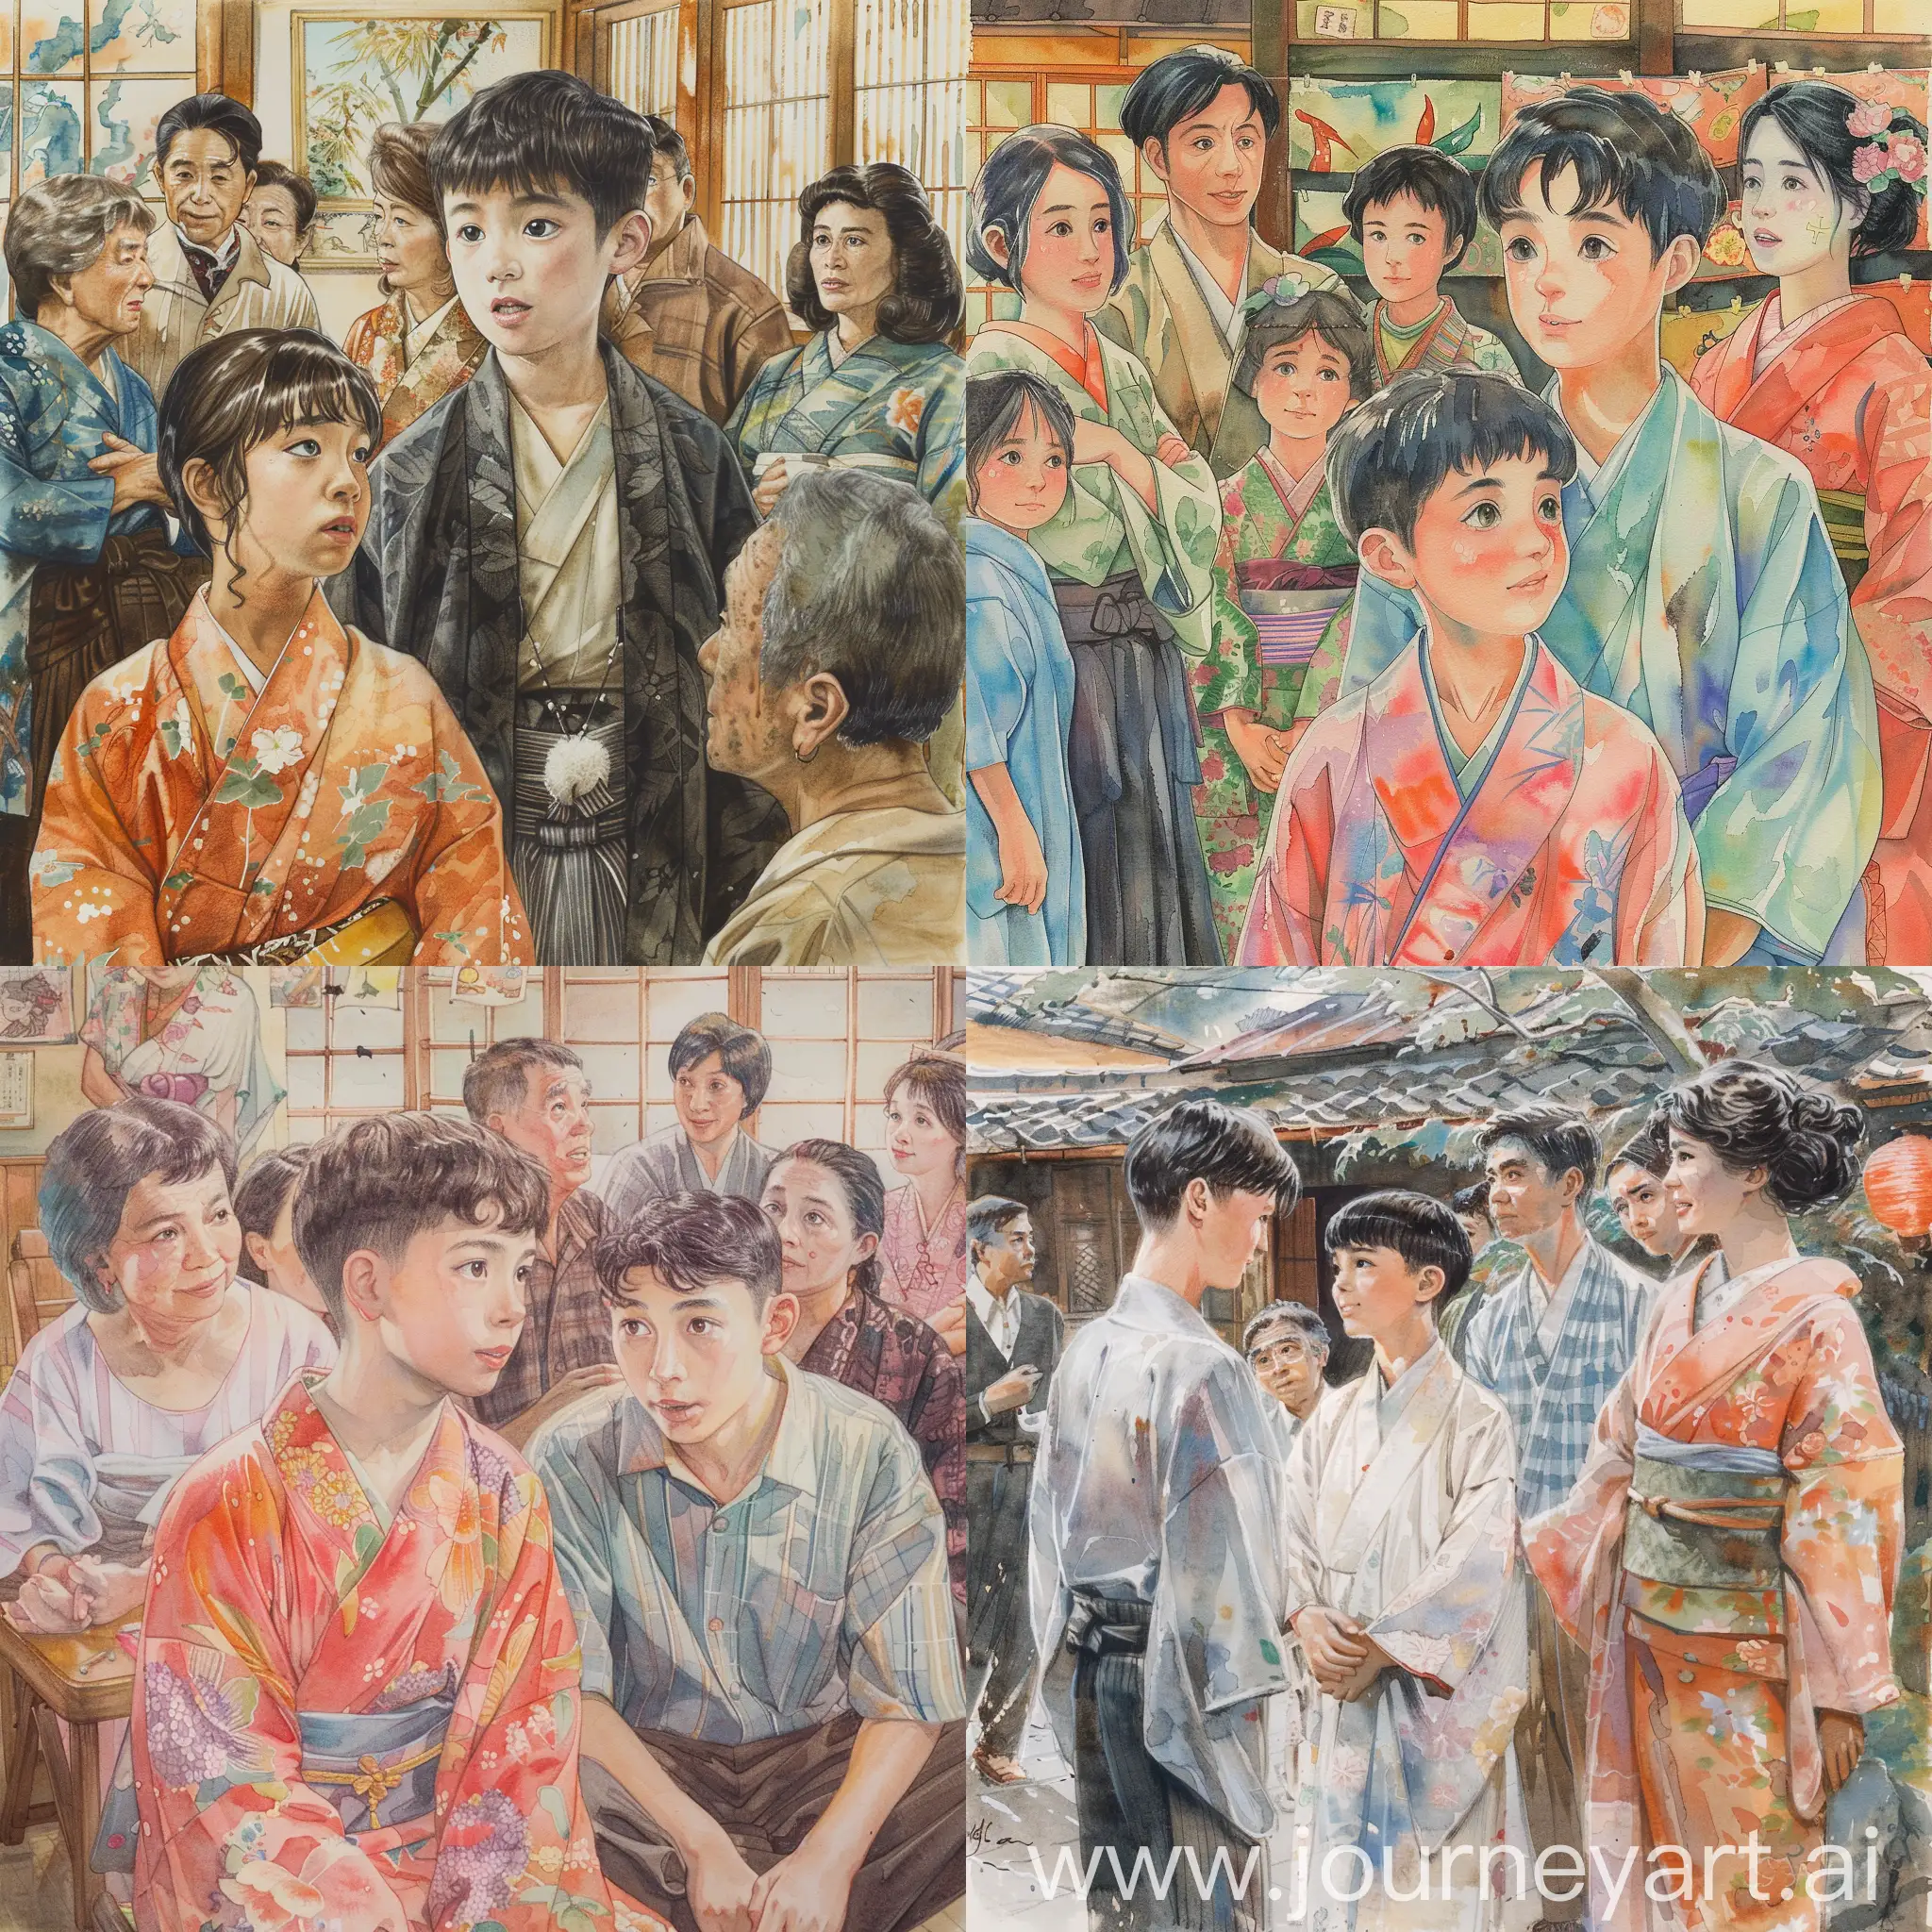 Japanese style, 18 year old boy and servant woman in kimono surrounded by supportive adults who have difficulty communicating and in a luminous watercolor style that reflects their collective perseverance, learning environment, soft pastel centered aesthetic with a serene and dreamy atmosphere, relief punk, working class subject, east village art, Japanese expressionism, storybook illustration .